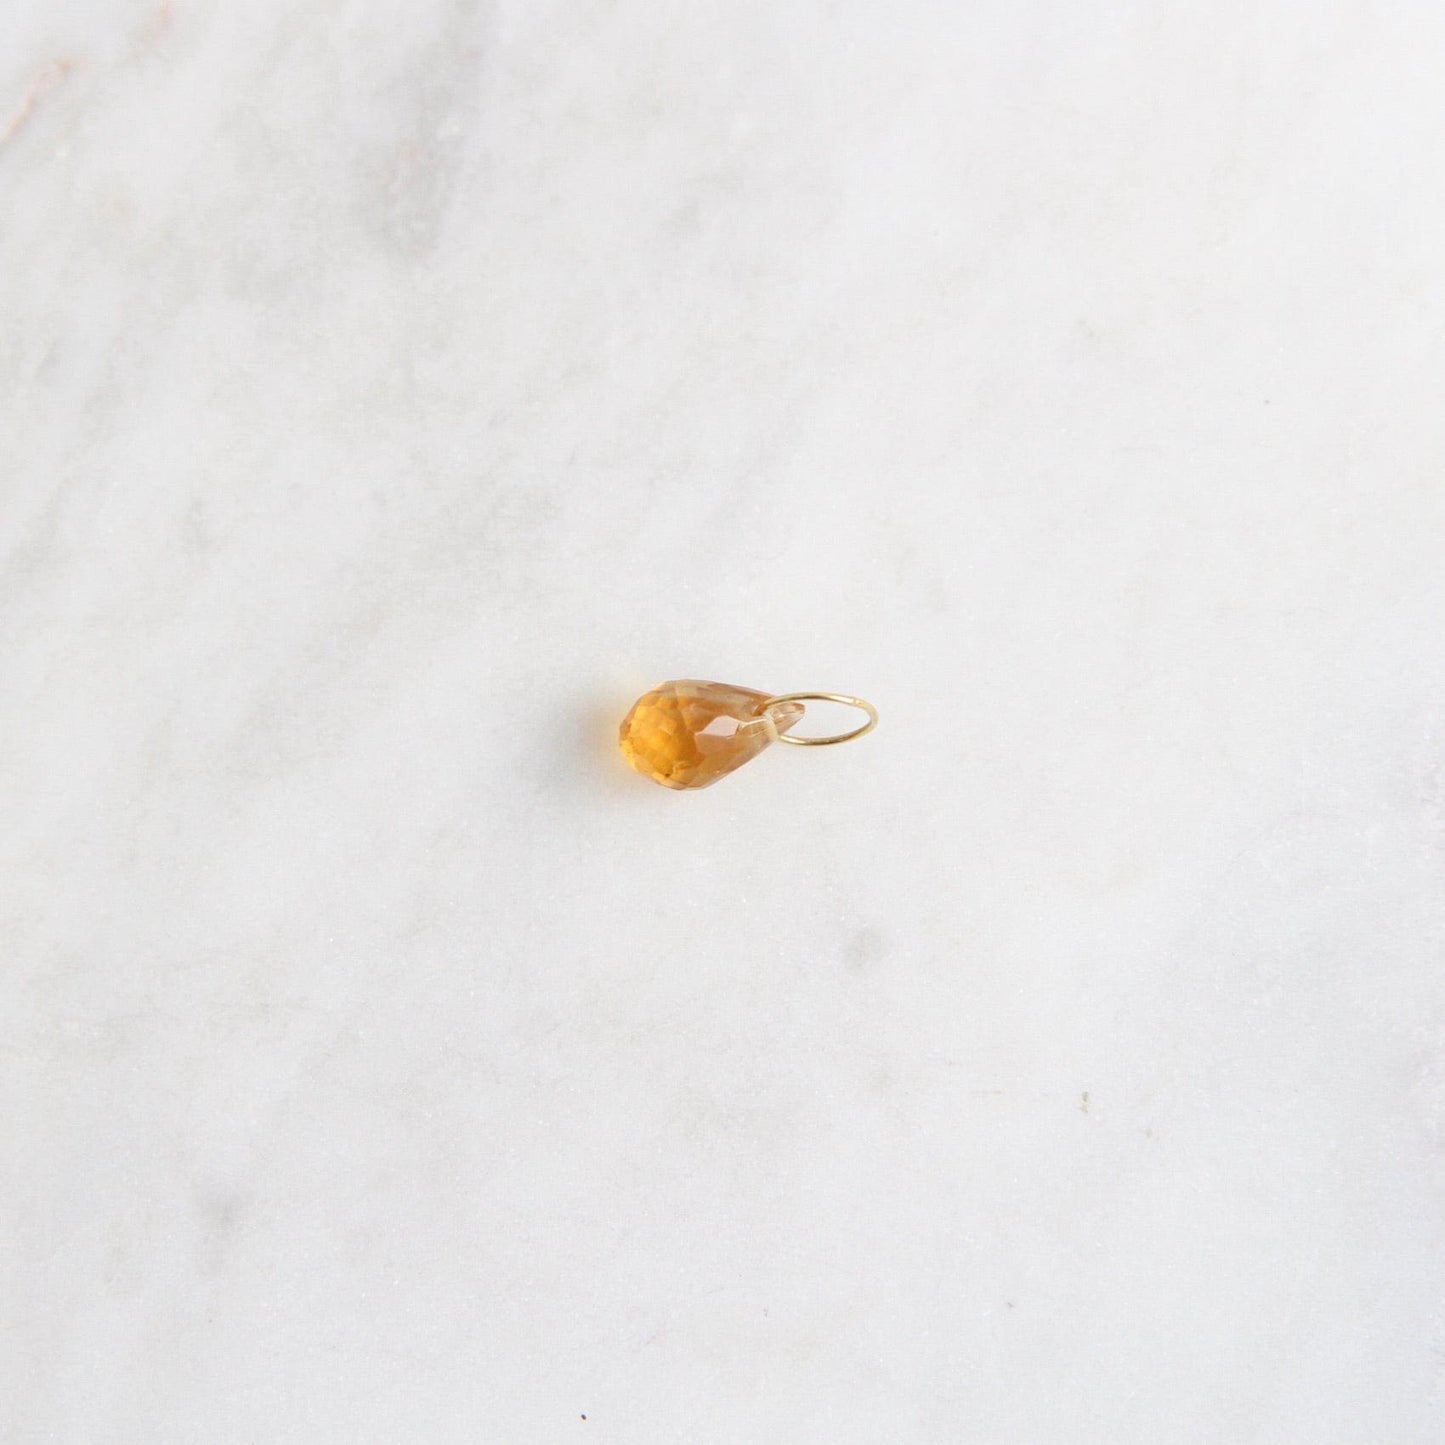 CHM Citrine - High Faceted Drop Gemstone on 14k Gold Wire